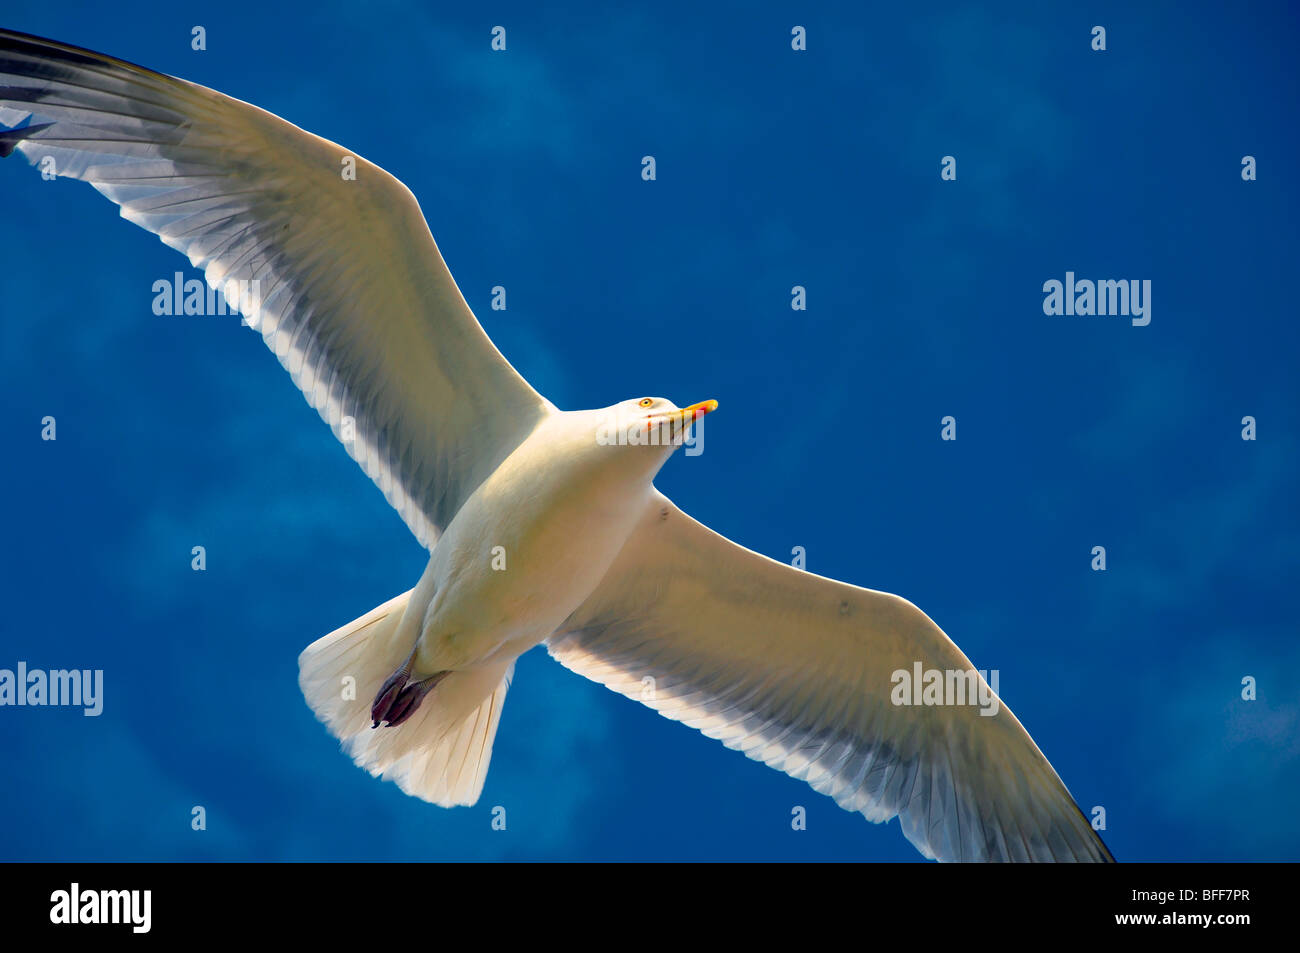 Flying seagull Stock Photo